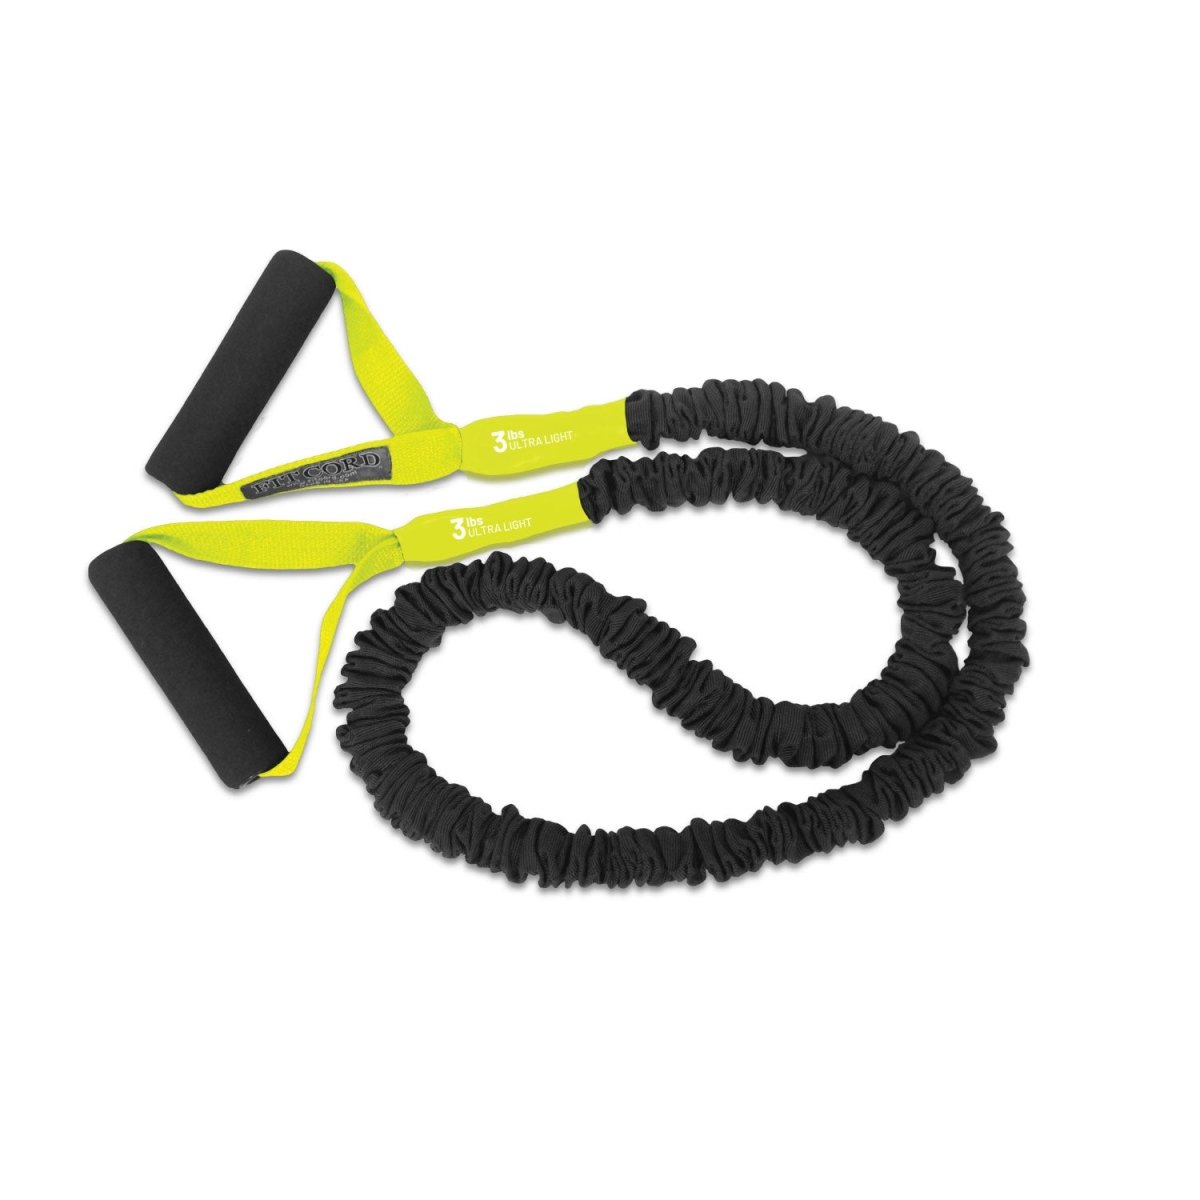 Ultra light 3lb resistance band with padded handles. Great for rehab and increase mobility. This is a beginner band with very little resistance